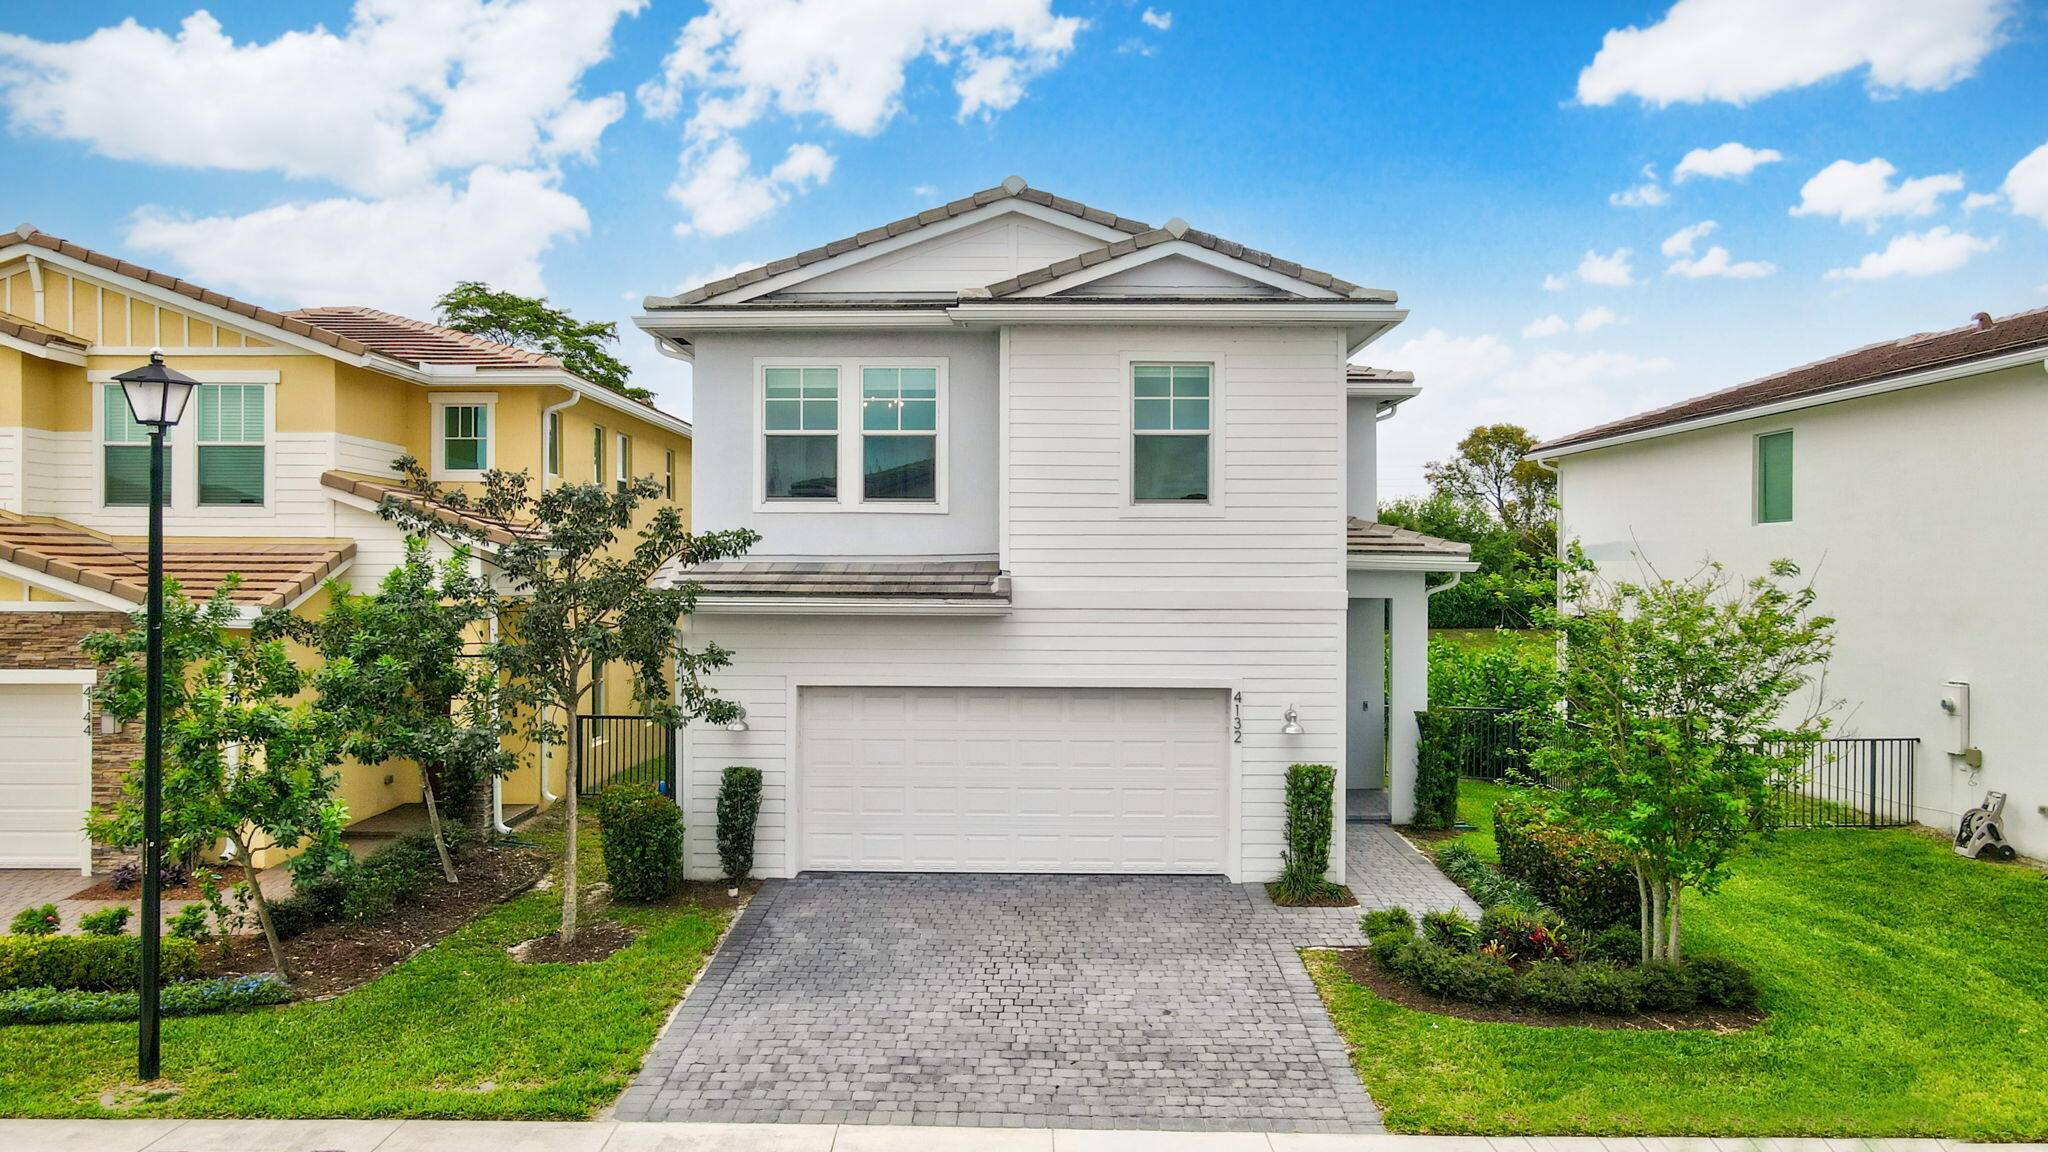 Nestled in highly desirable gated community of Veleiros at Crystal Lake, this 2020 built Ancora model boasts a spacious floor plan and an abundance of natural light.